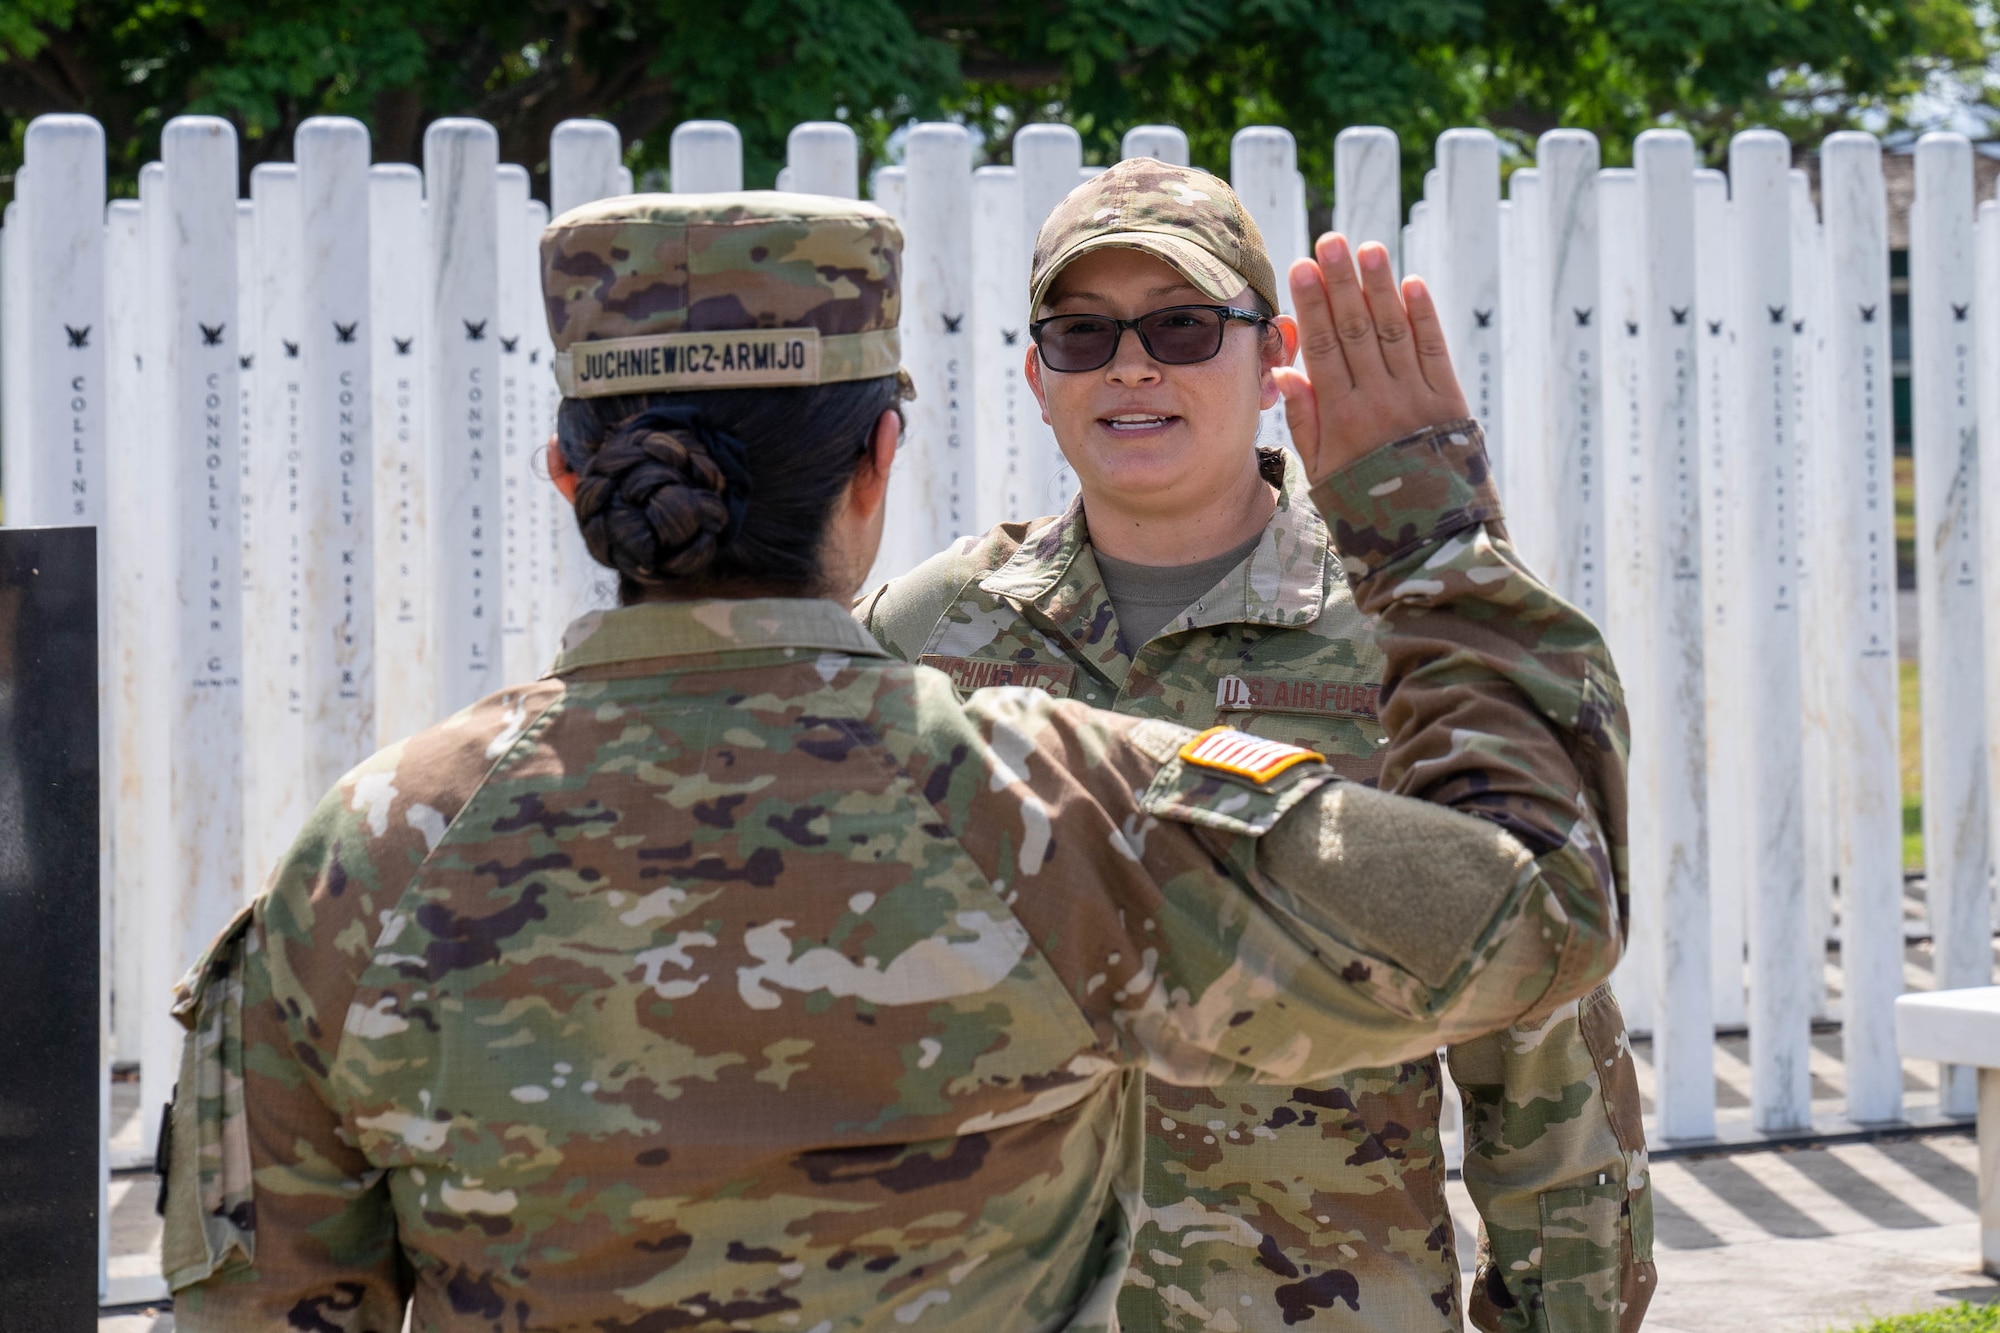 U.S. Air Force Tech. Sgt. Melissa Juchniewicz, 535th Airlift Squadron Squadron Aviation Resource Management journeyman, receives the reenlistment oath from U.S. Army Capt. Emily Juchniewicz-Armijo, 11th Expeditionary Combat Aviation Brigade medical service officer, at Joint Base Pearl Harbor-Hickam, Hawaii, June 30, 2022. Juchniewicz, originally from the To'hajiilee Navajo Reservation, joined the Air Force on March 10, 2009. (U.S. Air Force photo by Senior Airman Makensie Cooper)